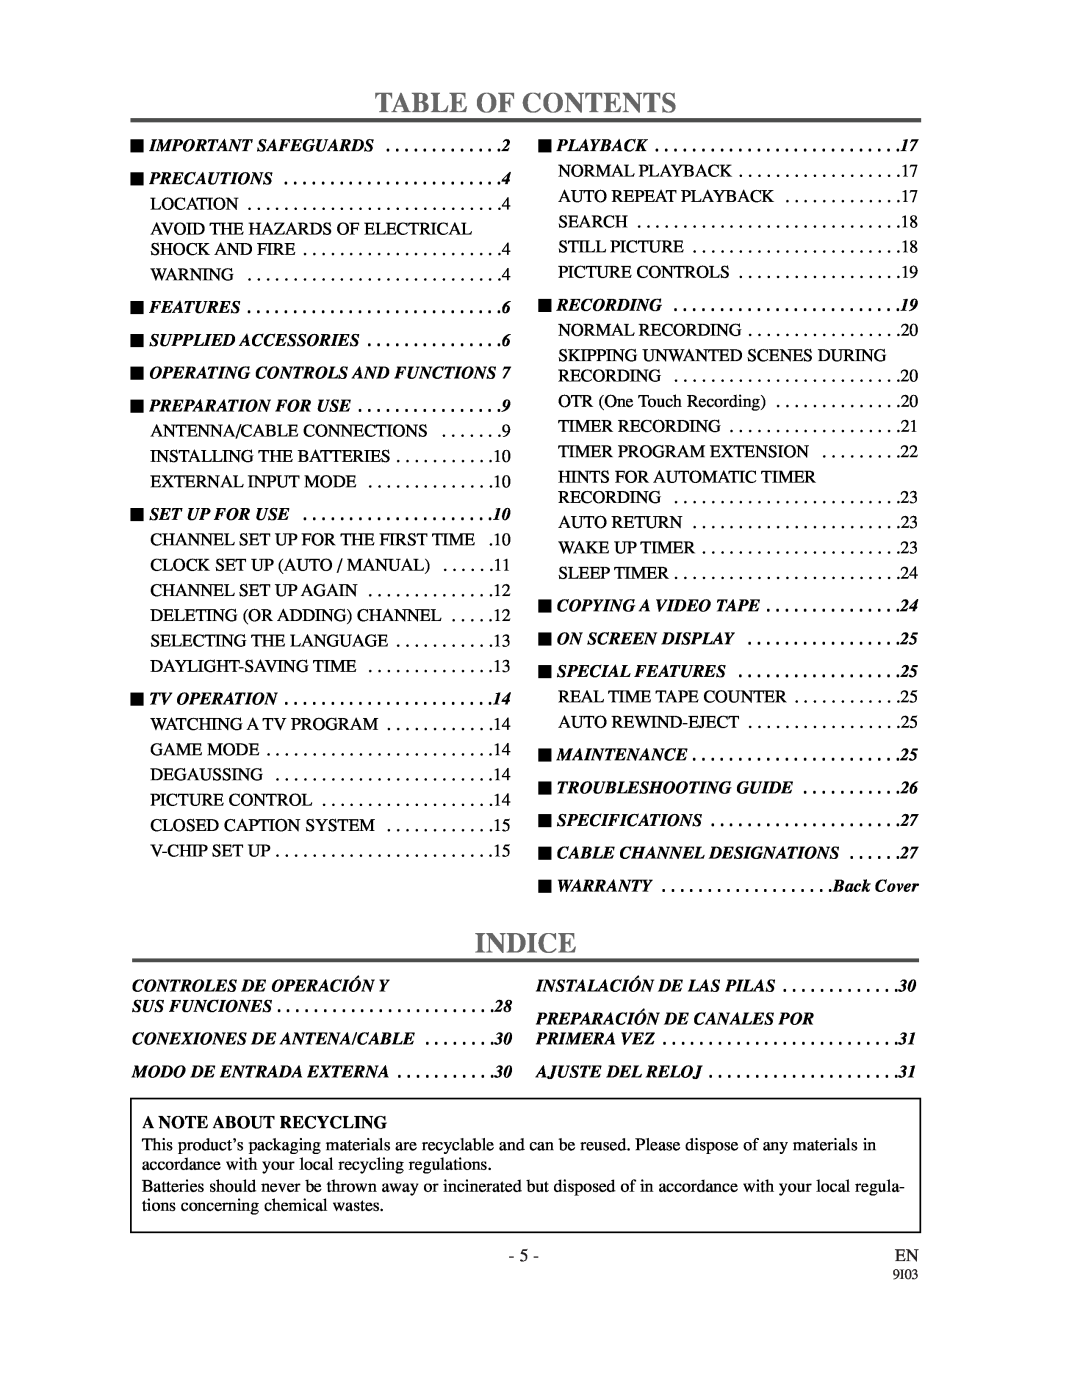 Sylvania 6313CC owner manual Table Of Contents, Indice, A Note About Recycling 